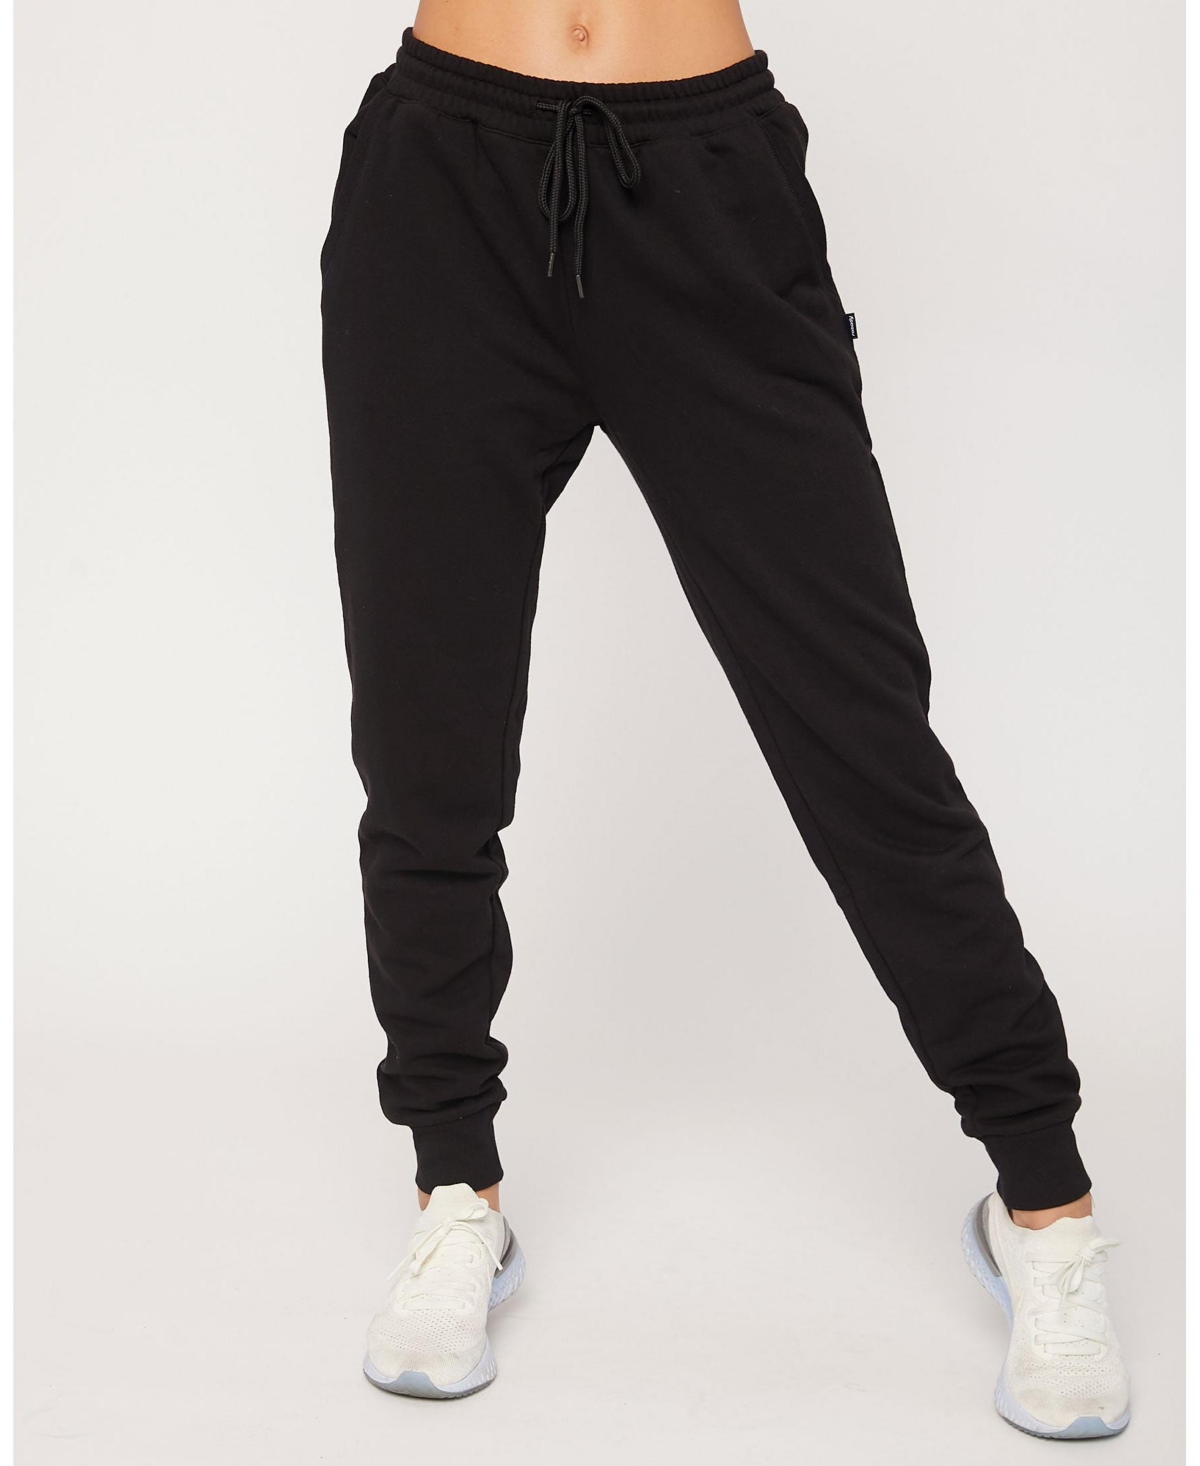 Weekend French Terry Joggers For Women - Black